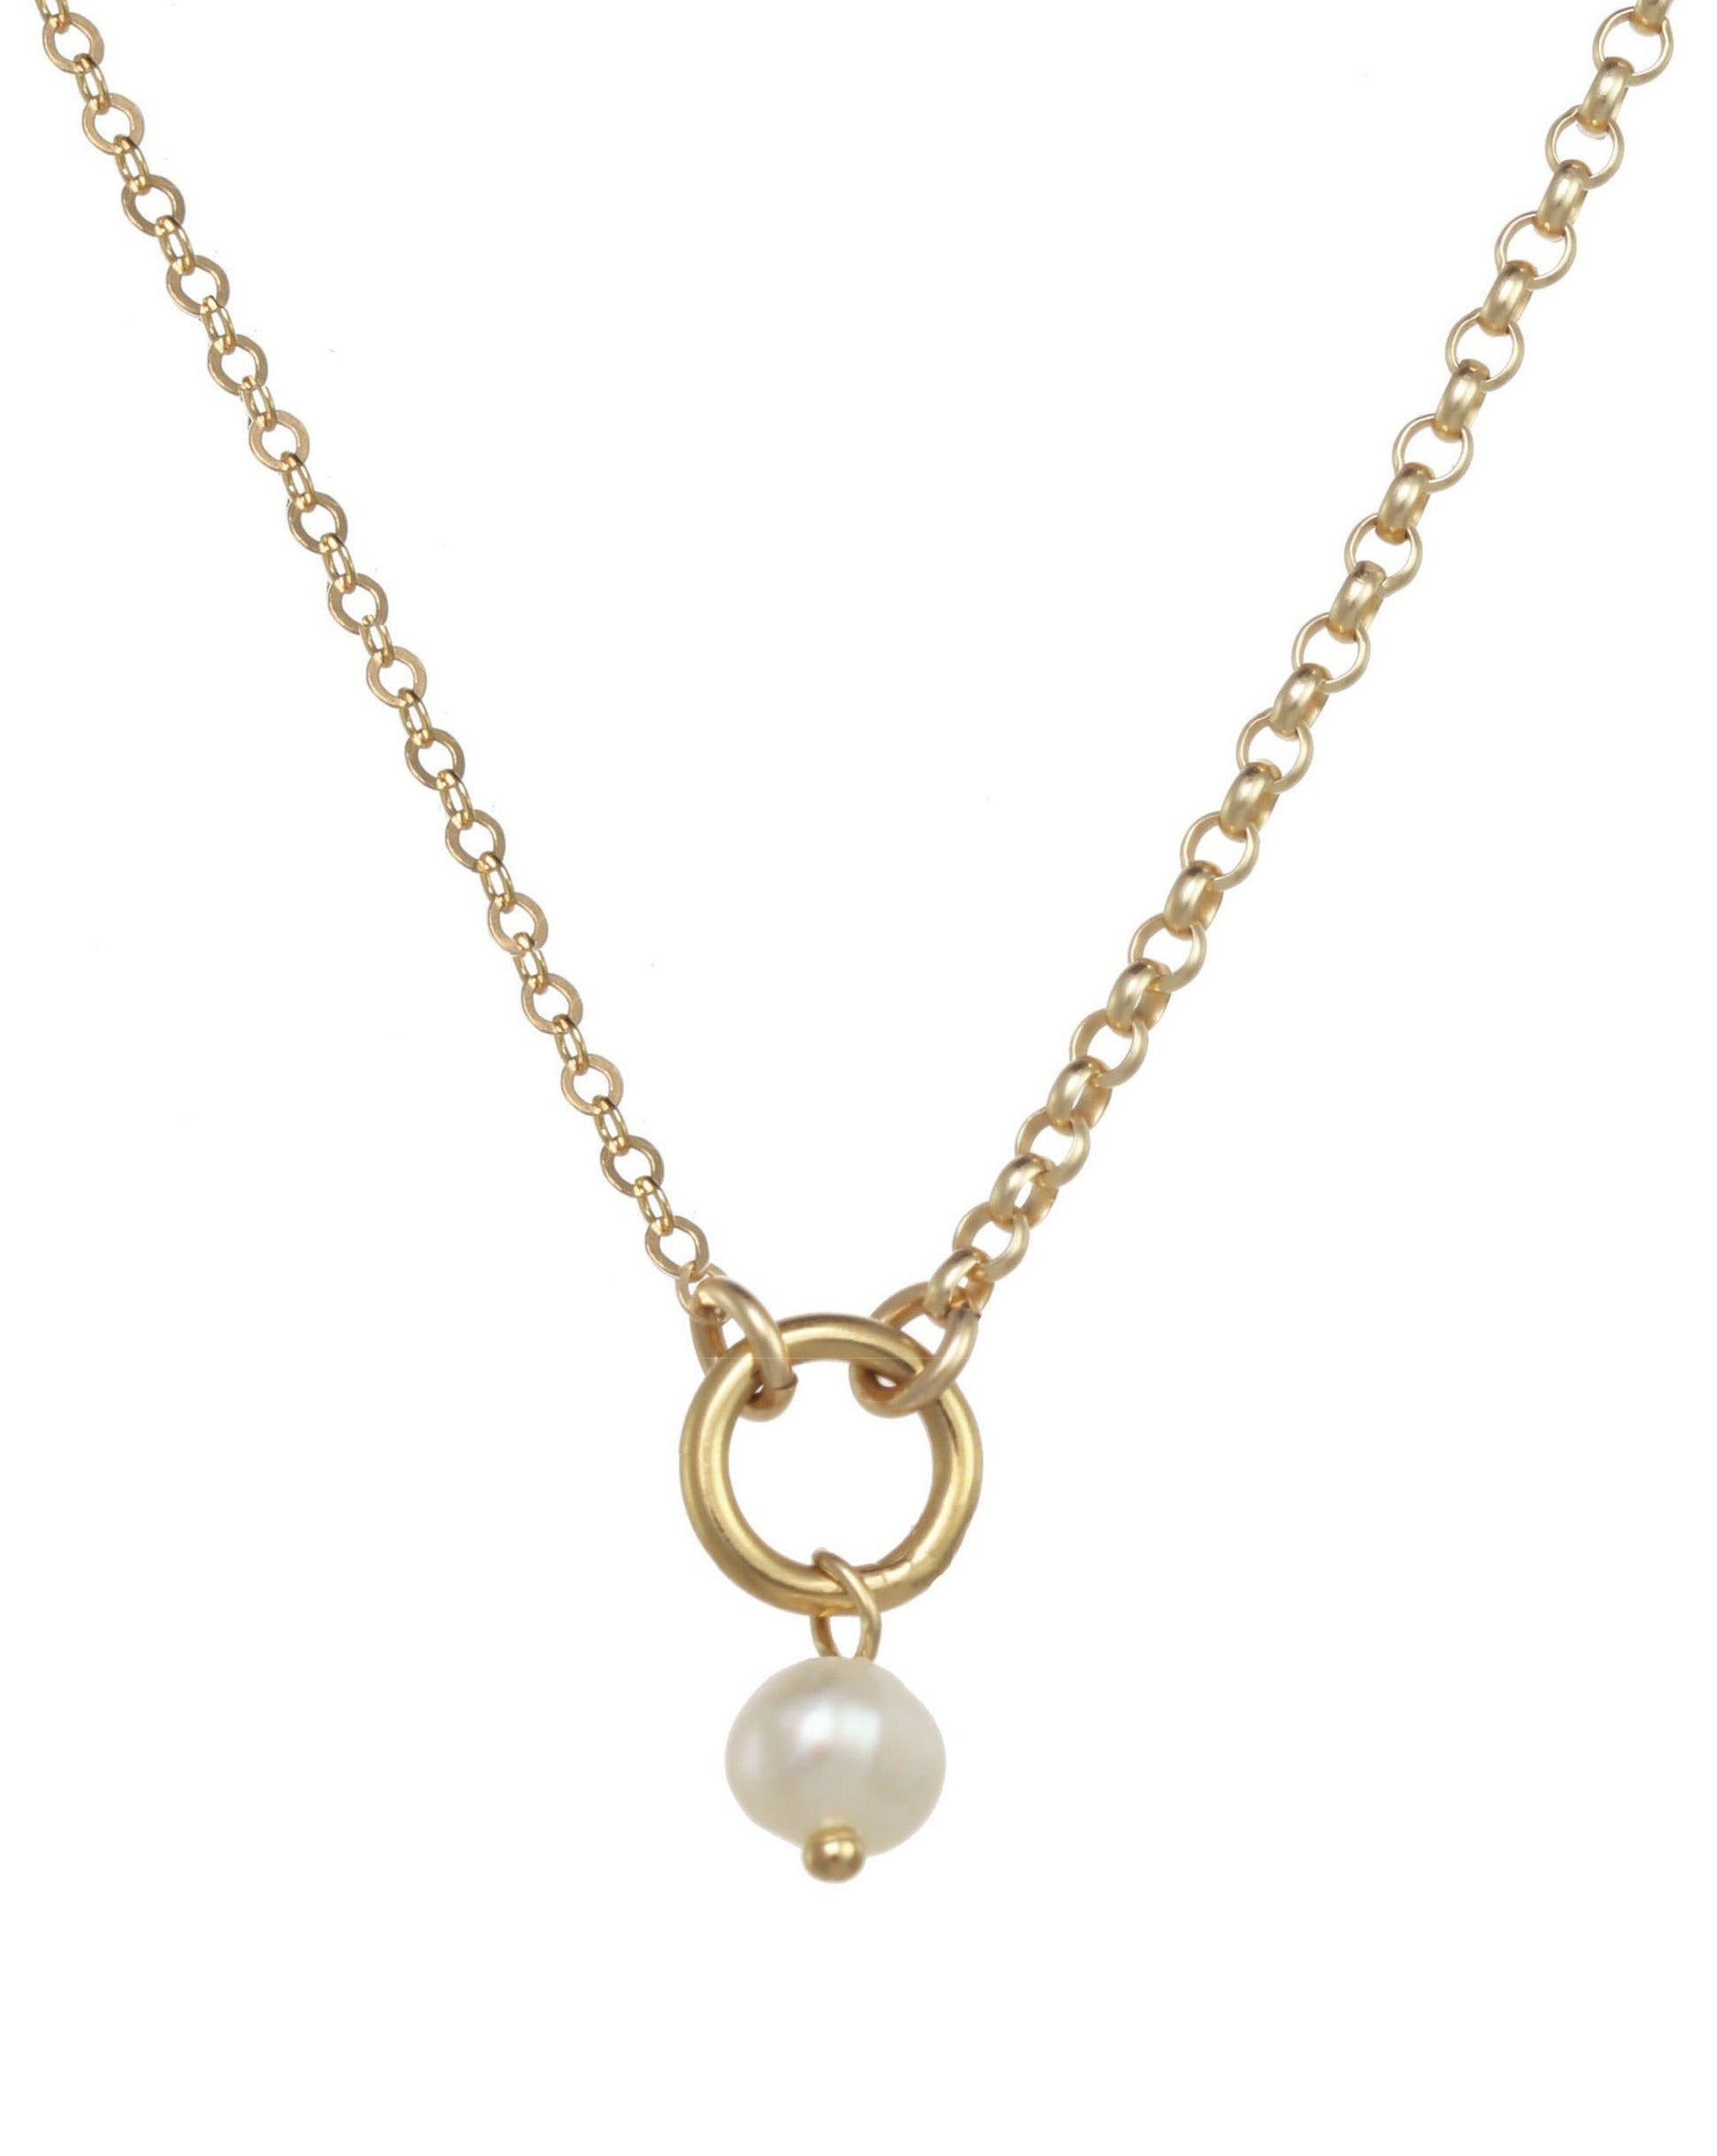 Divya Necklace by KOZAKH. A 16 to 18 inch adjustable length necklace in 14K Gold Filled, featuring a white 3-4mm pearl.